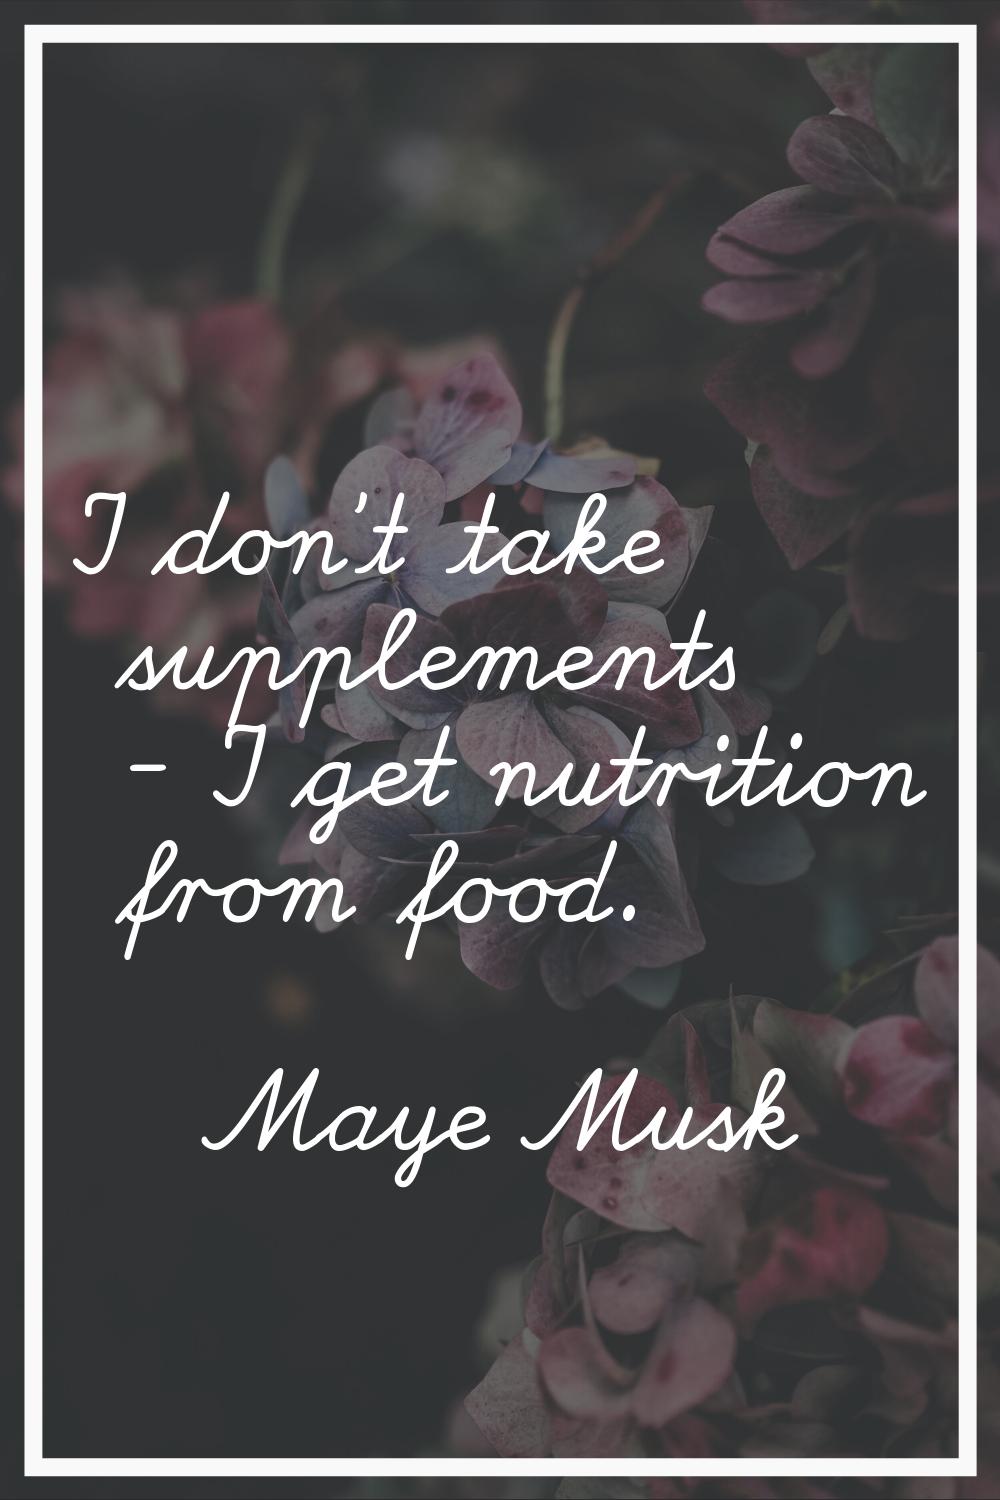 I don't take supplements - I get nutrition from food.